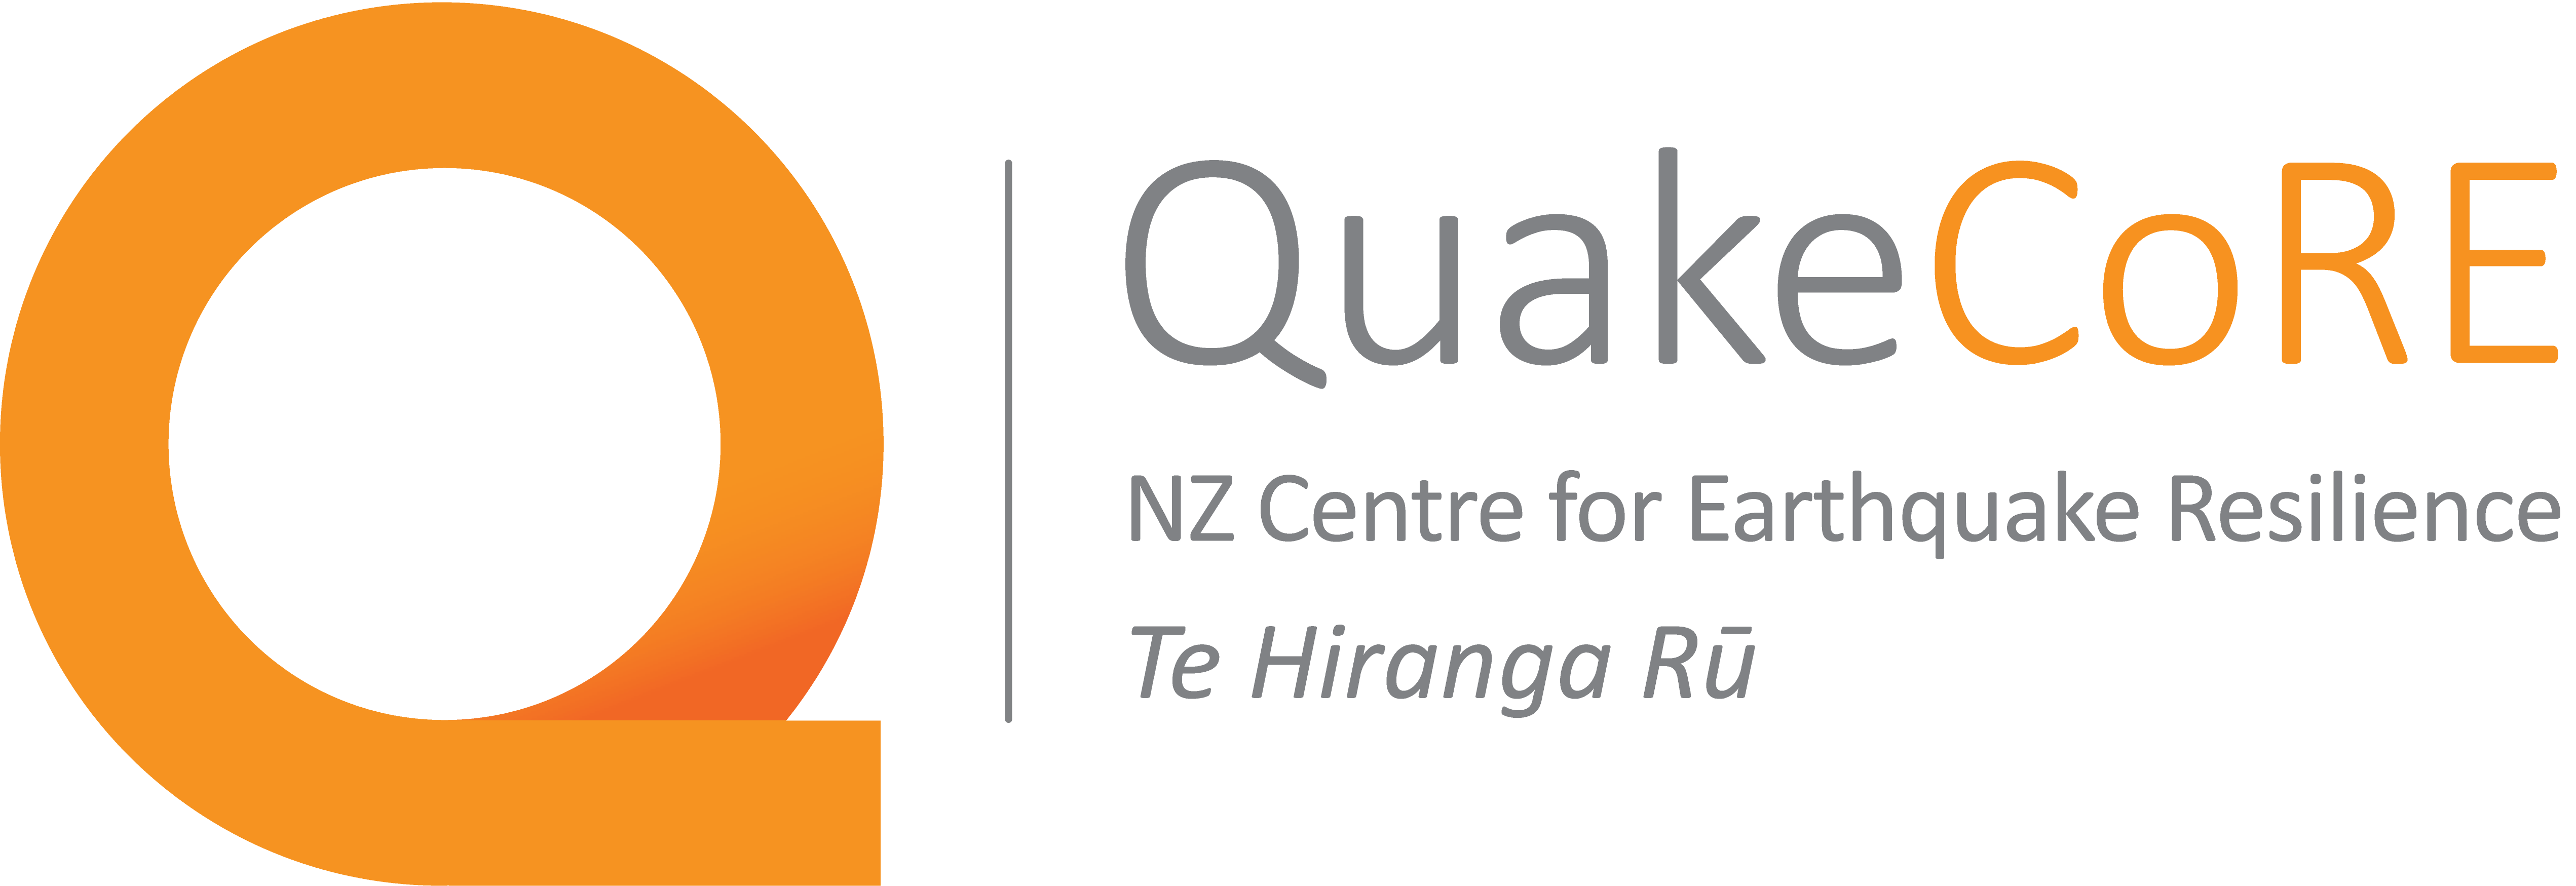 Quakecore Logo: The letter Q on the left, the text QuakeCoRE, NZ Center for Earthquake Resilience Te Hiring Ru, on the right